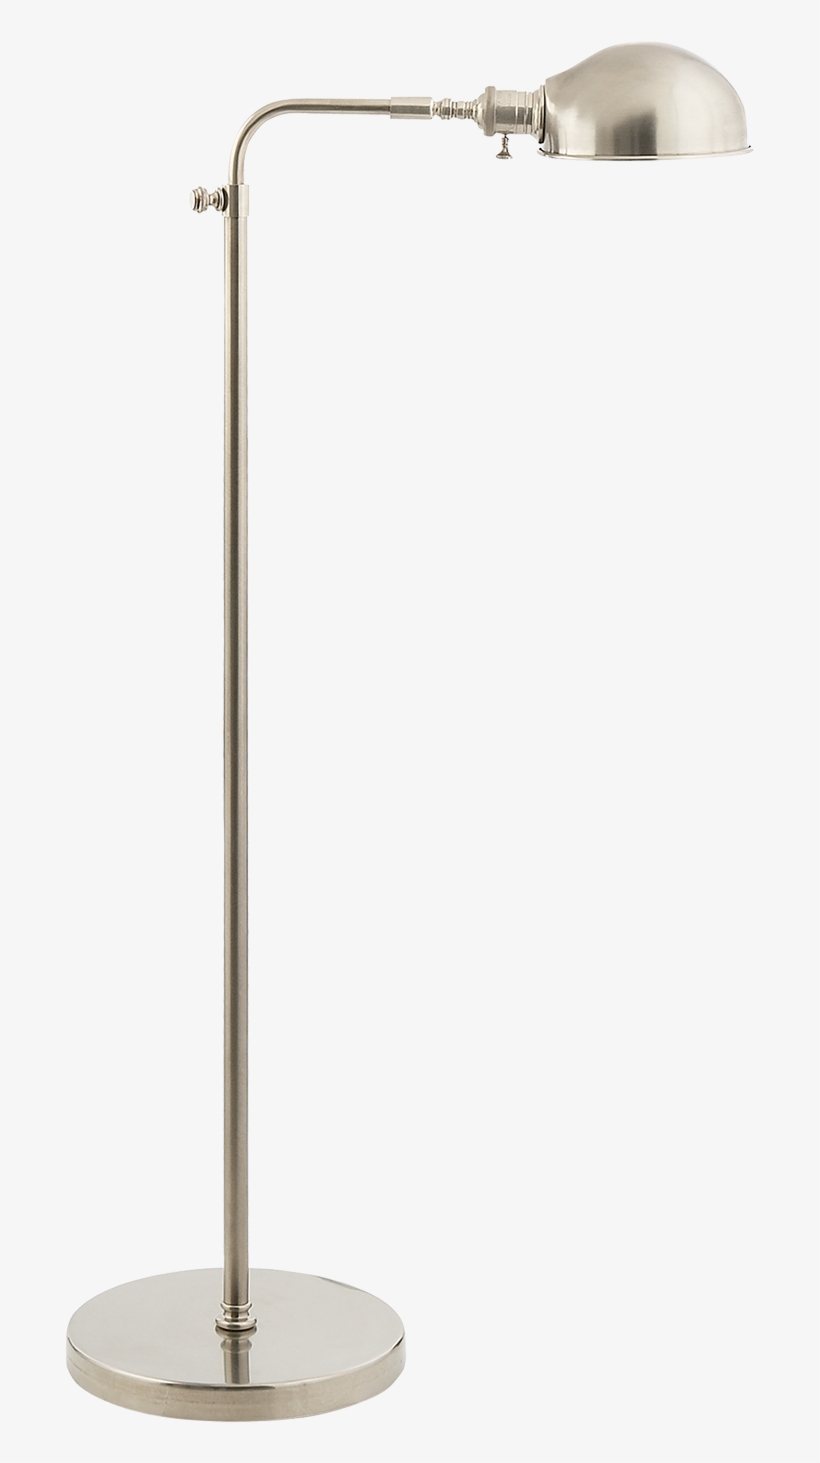 Old Pharmacy Floor Lamp In Antique Nickel - Electric Light, transparent png #4019875